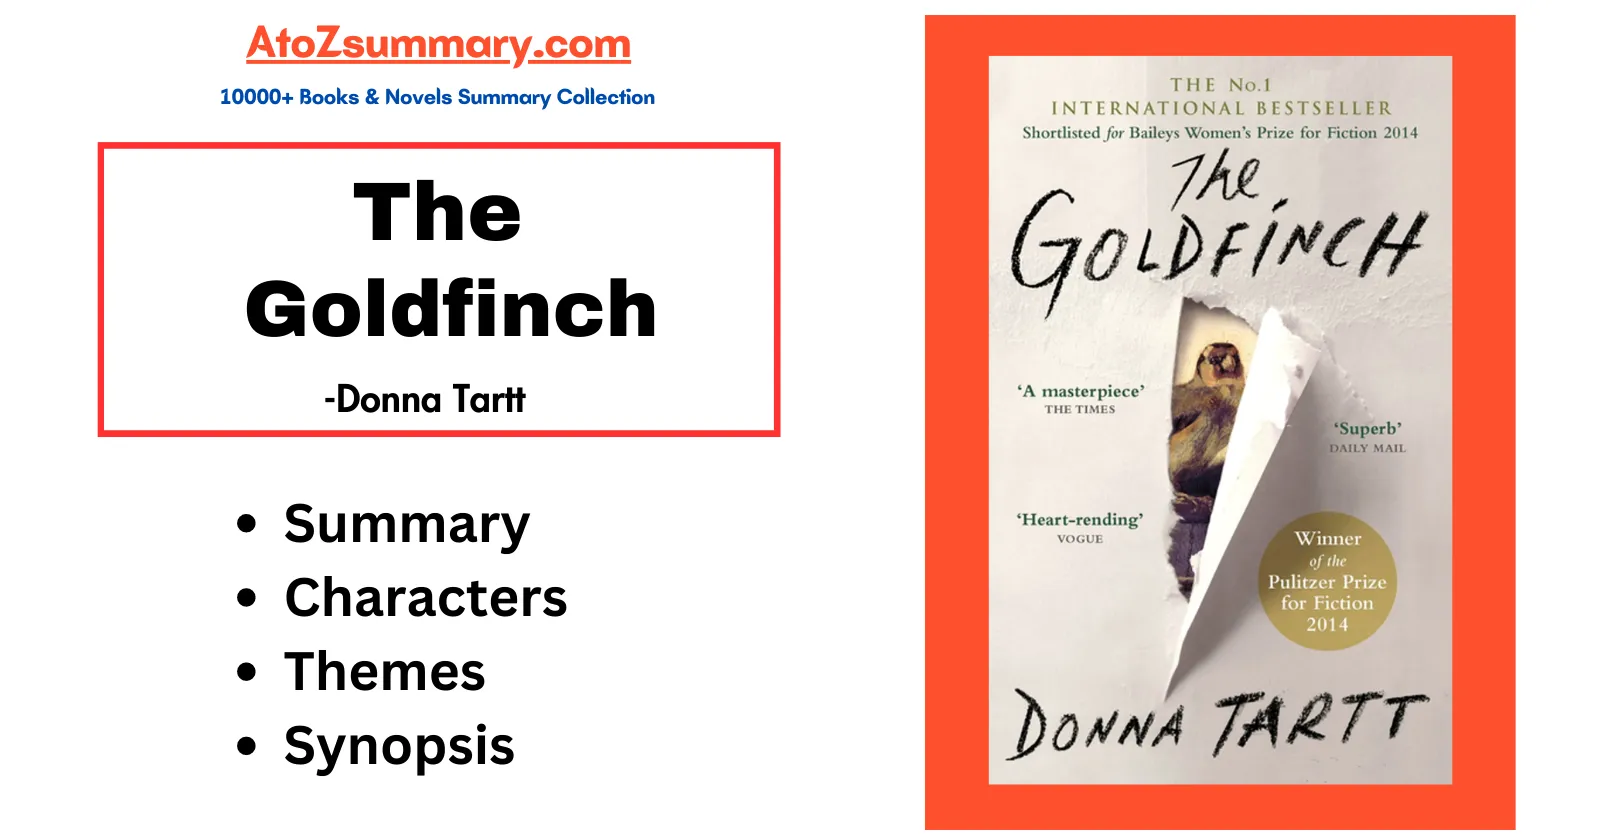 The Goldfinch Summary,Themes,Characters & Synopsis [Donna Tartt]